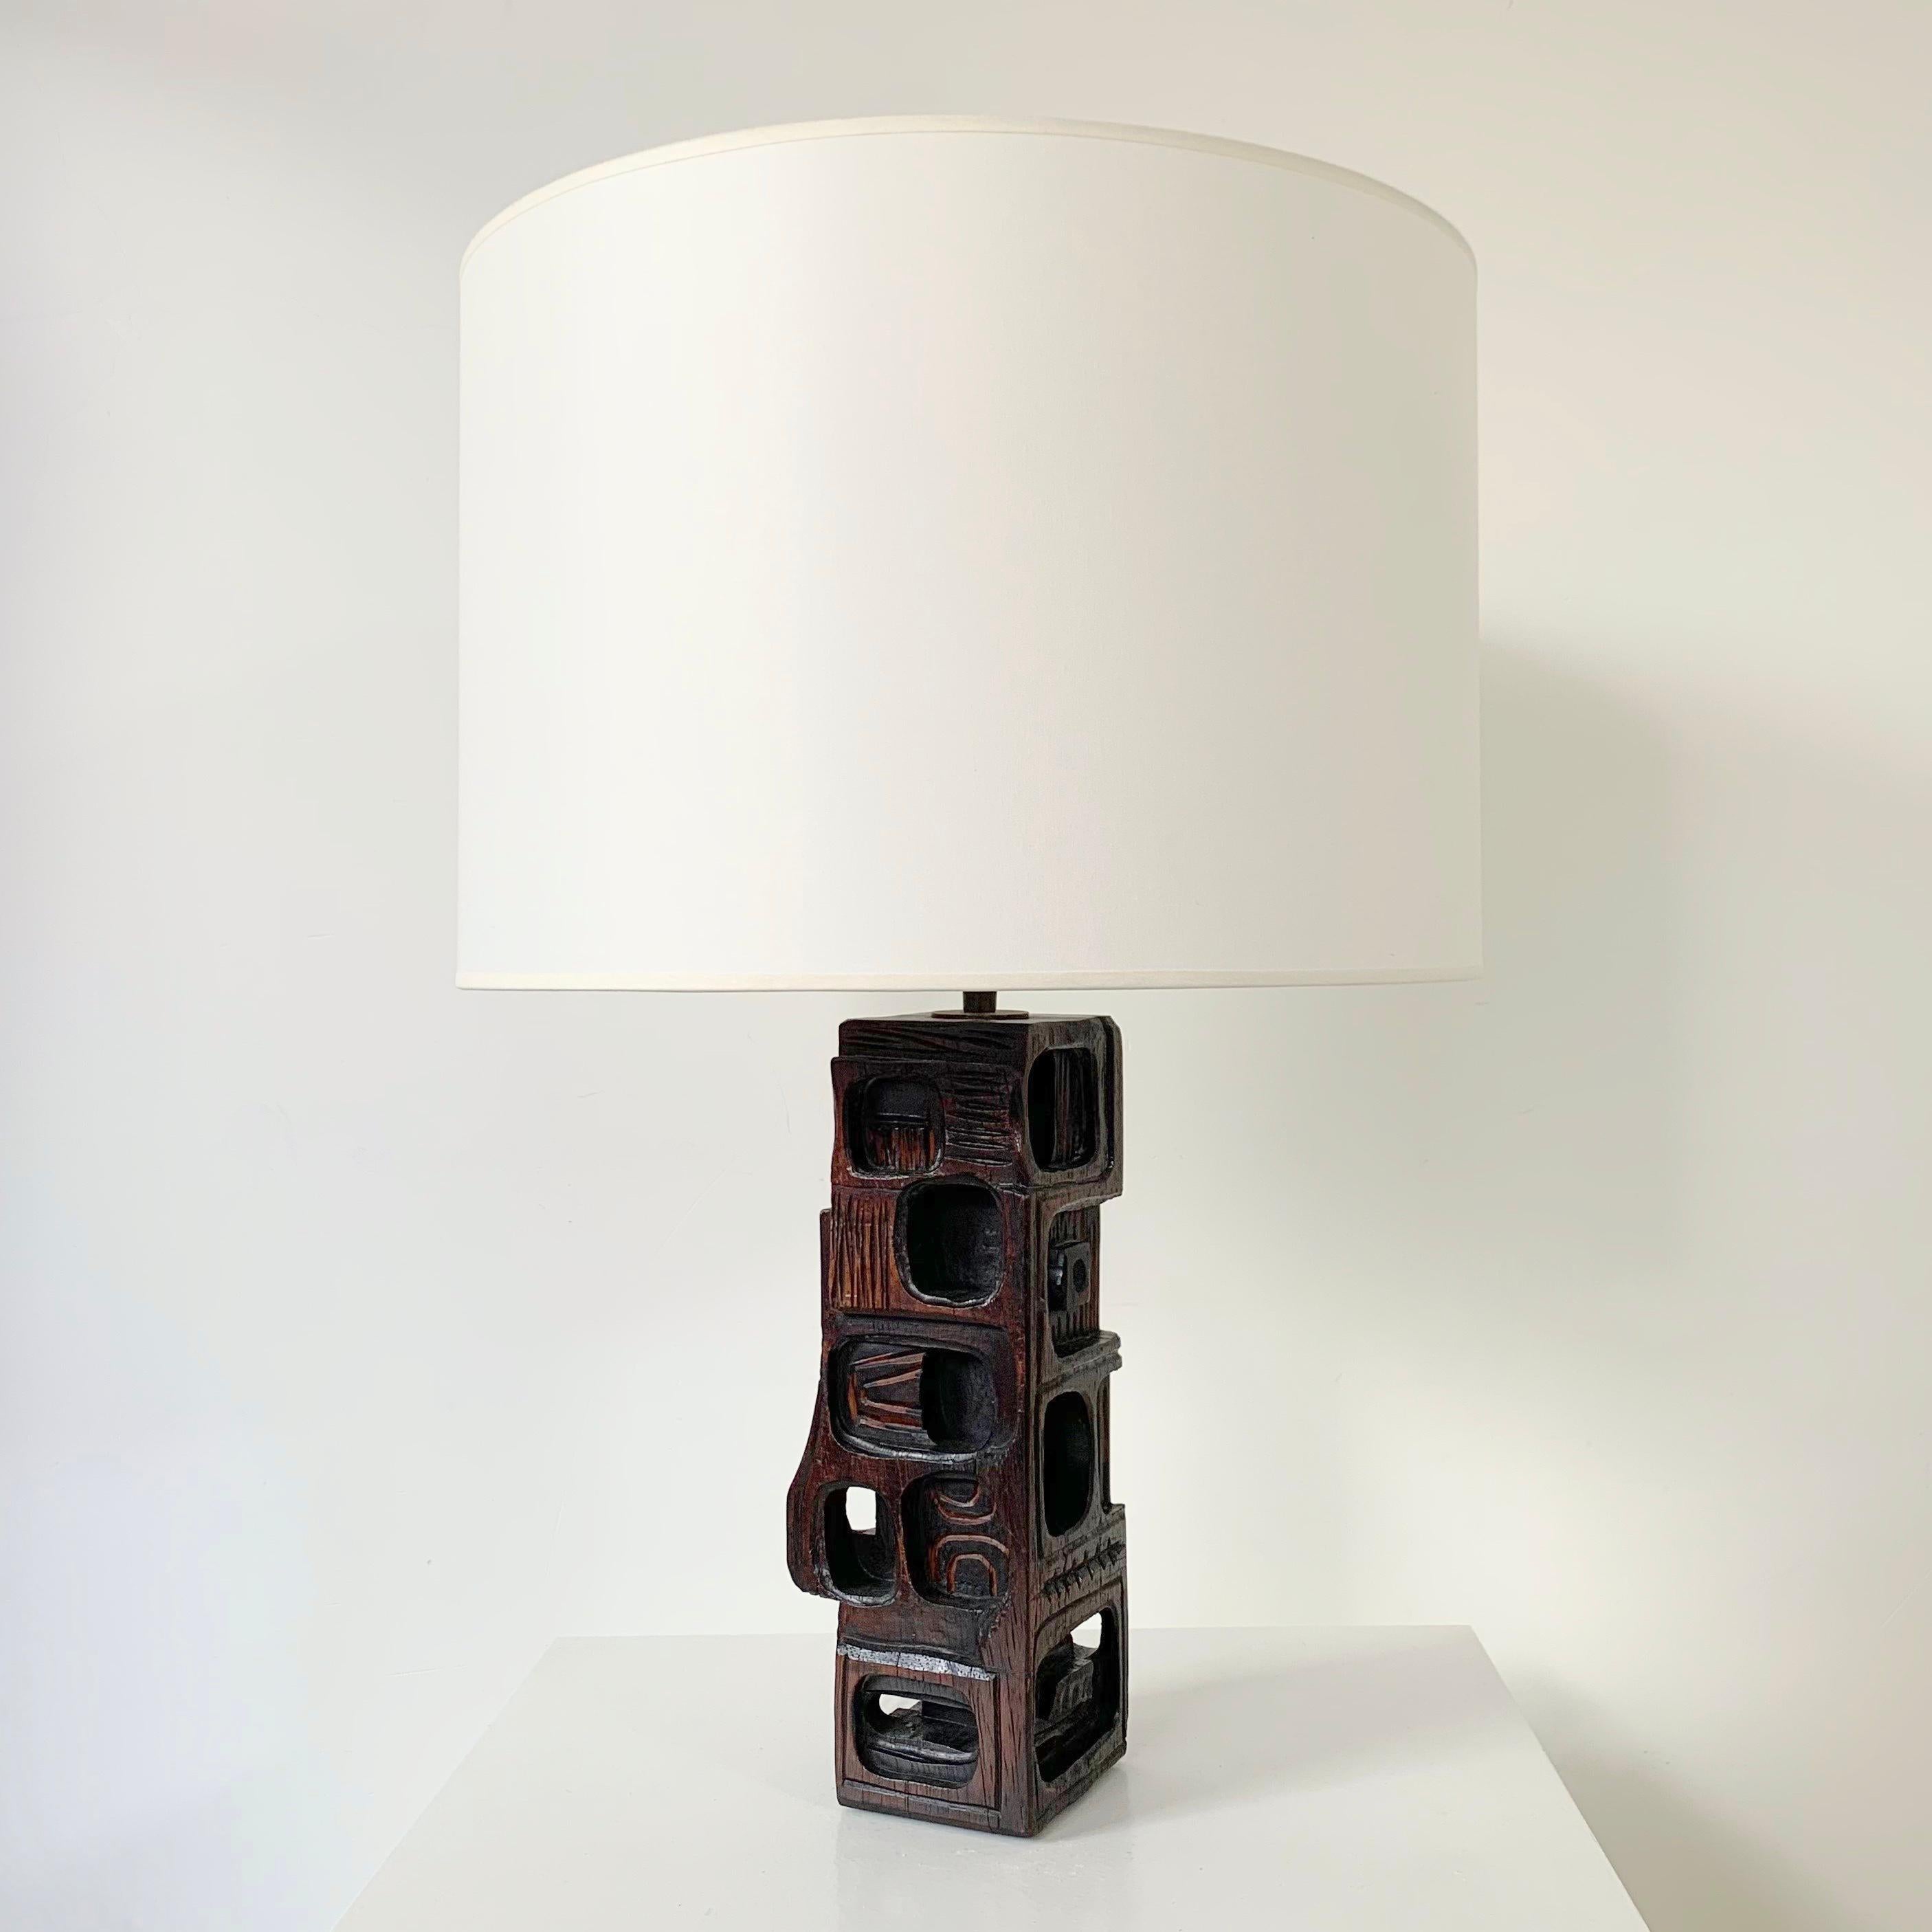 Nice sculptural table lamp by Gianni Pinna, circa 1970, Italy.
Hand carved wood. New fabric shade. 
Rewired. Signed underneath.
Dimensions: 59 cm H, 40 cm diameter.
All purchases are covered by our Buyer Protection Guarantee.
This item can be